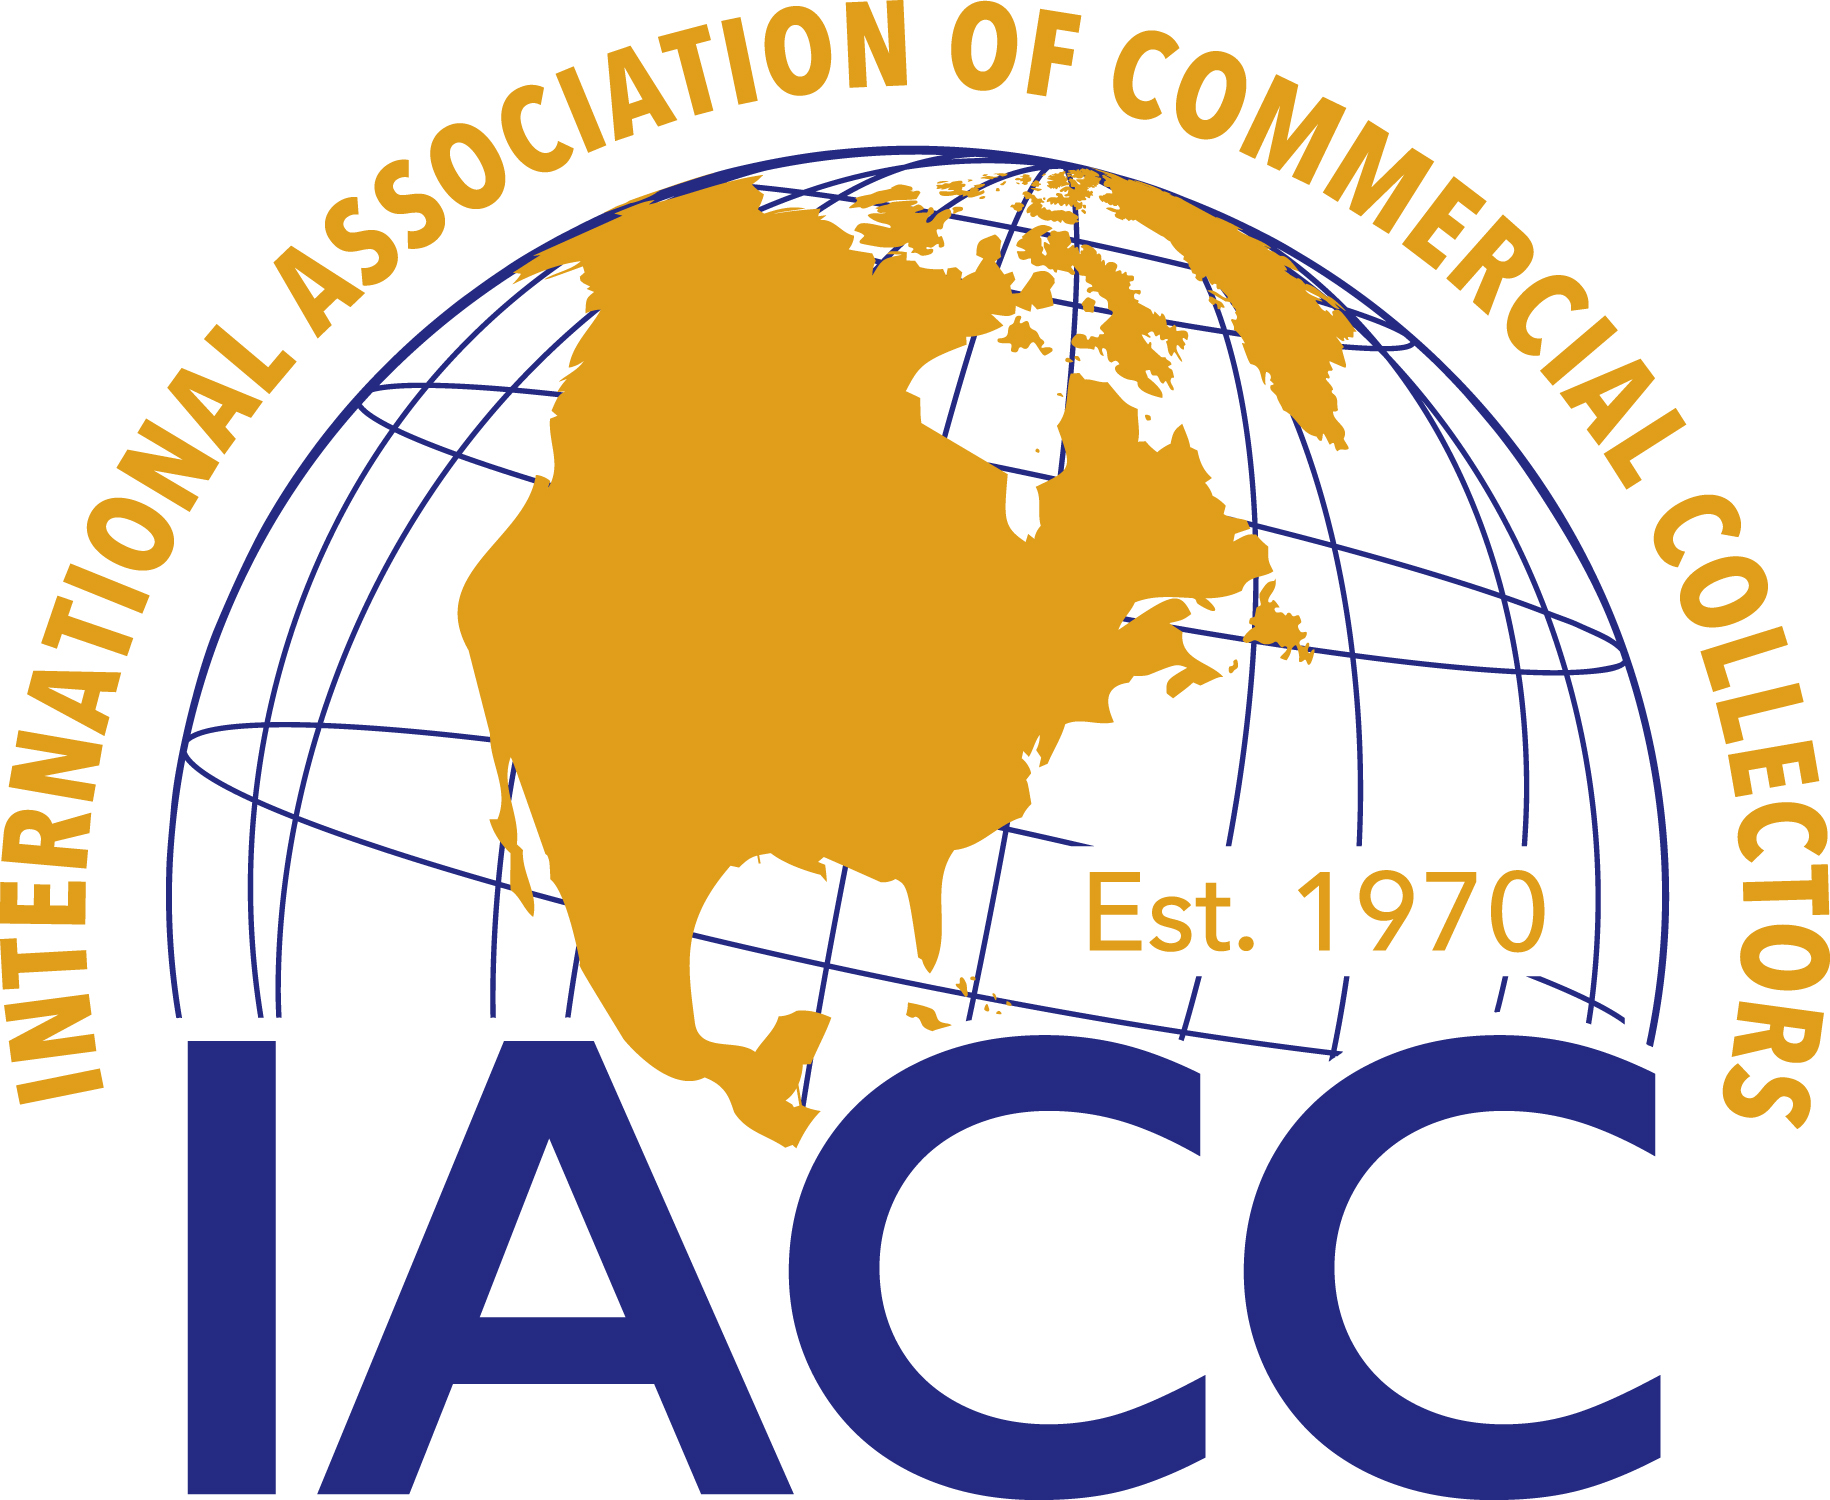 The International Association of Commercial Collectors